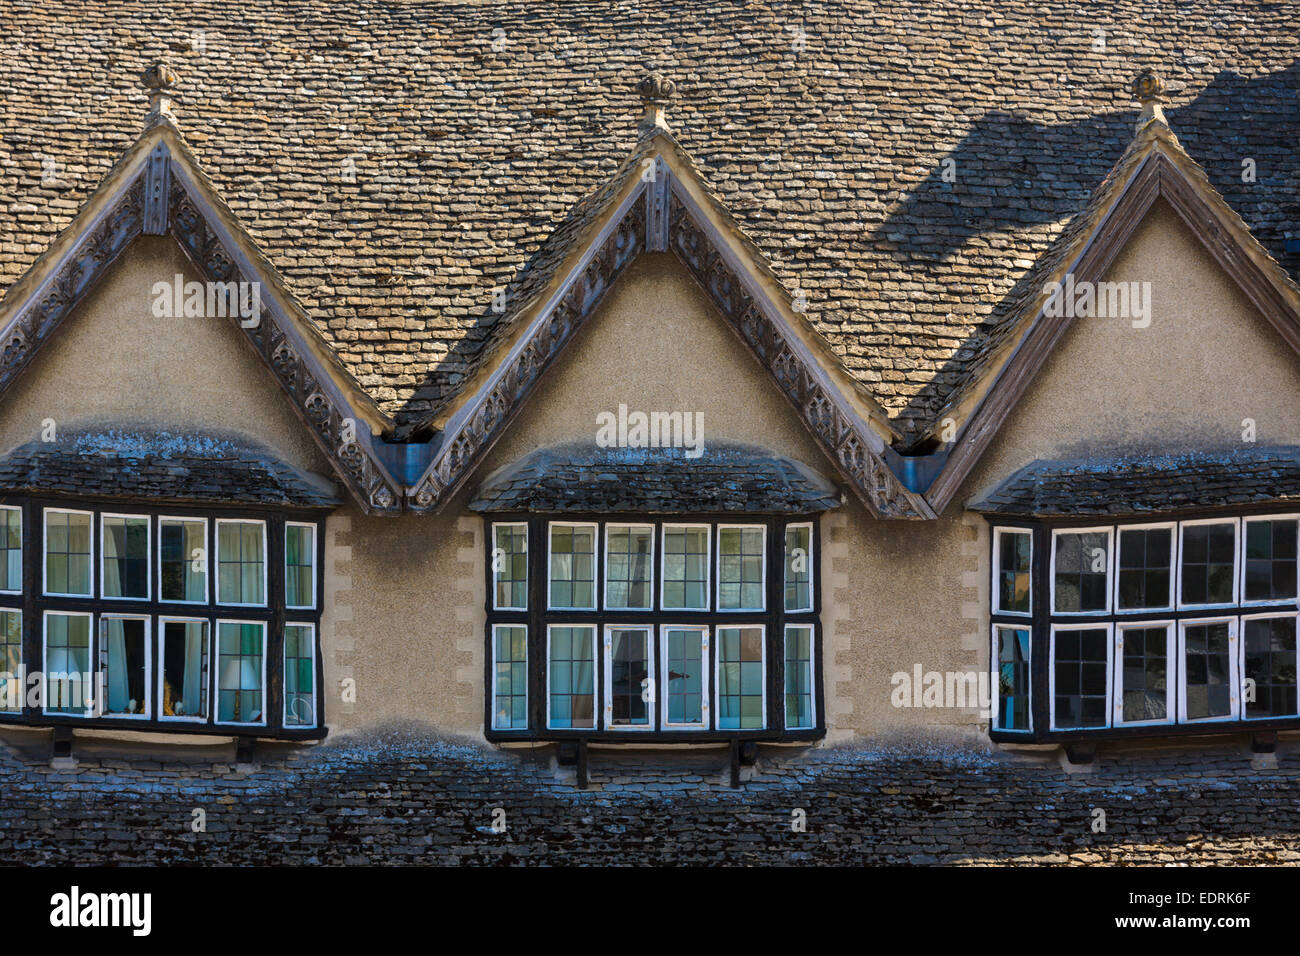 Medieval architecture windows and rooves of sloping old buildings along Burford High Street, The Cotswolds, Oxfordshire, UK Stock Photo